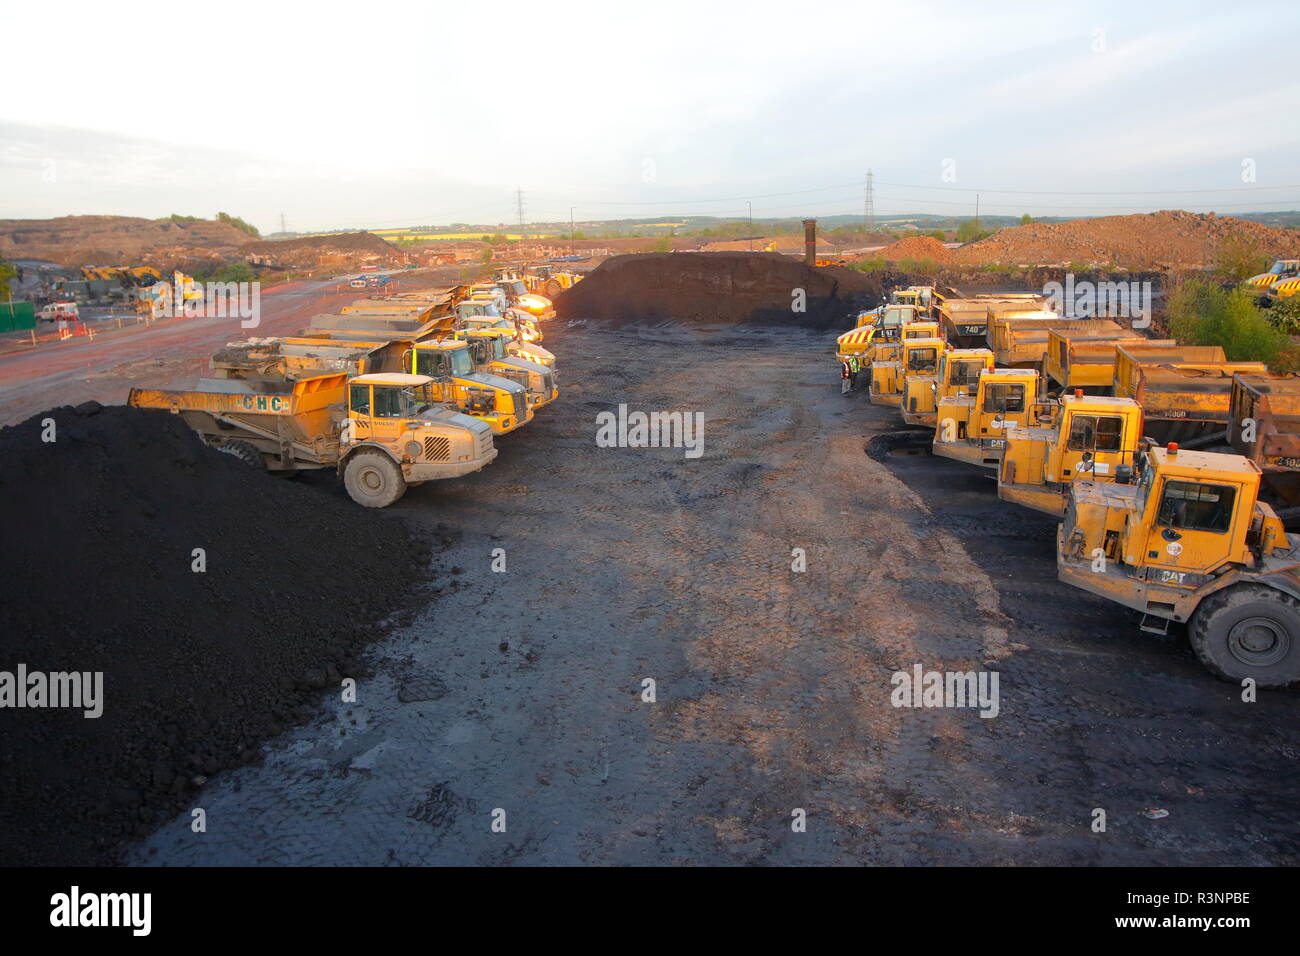 Dump trucks parked up on the Recycoal Coal Recycling site in Rossington,Doncaster which has now been demolished to build new houses. Stock Photo